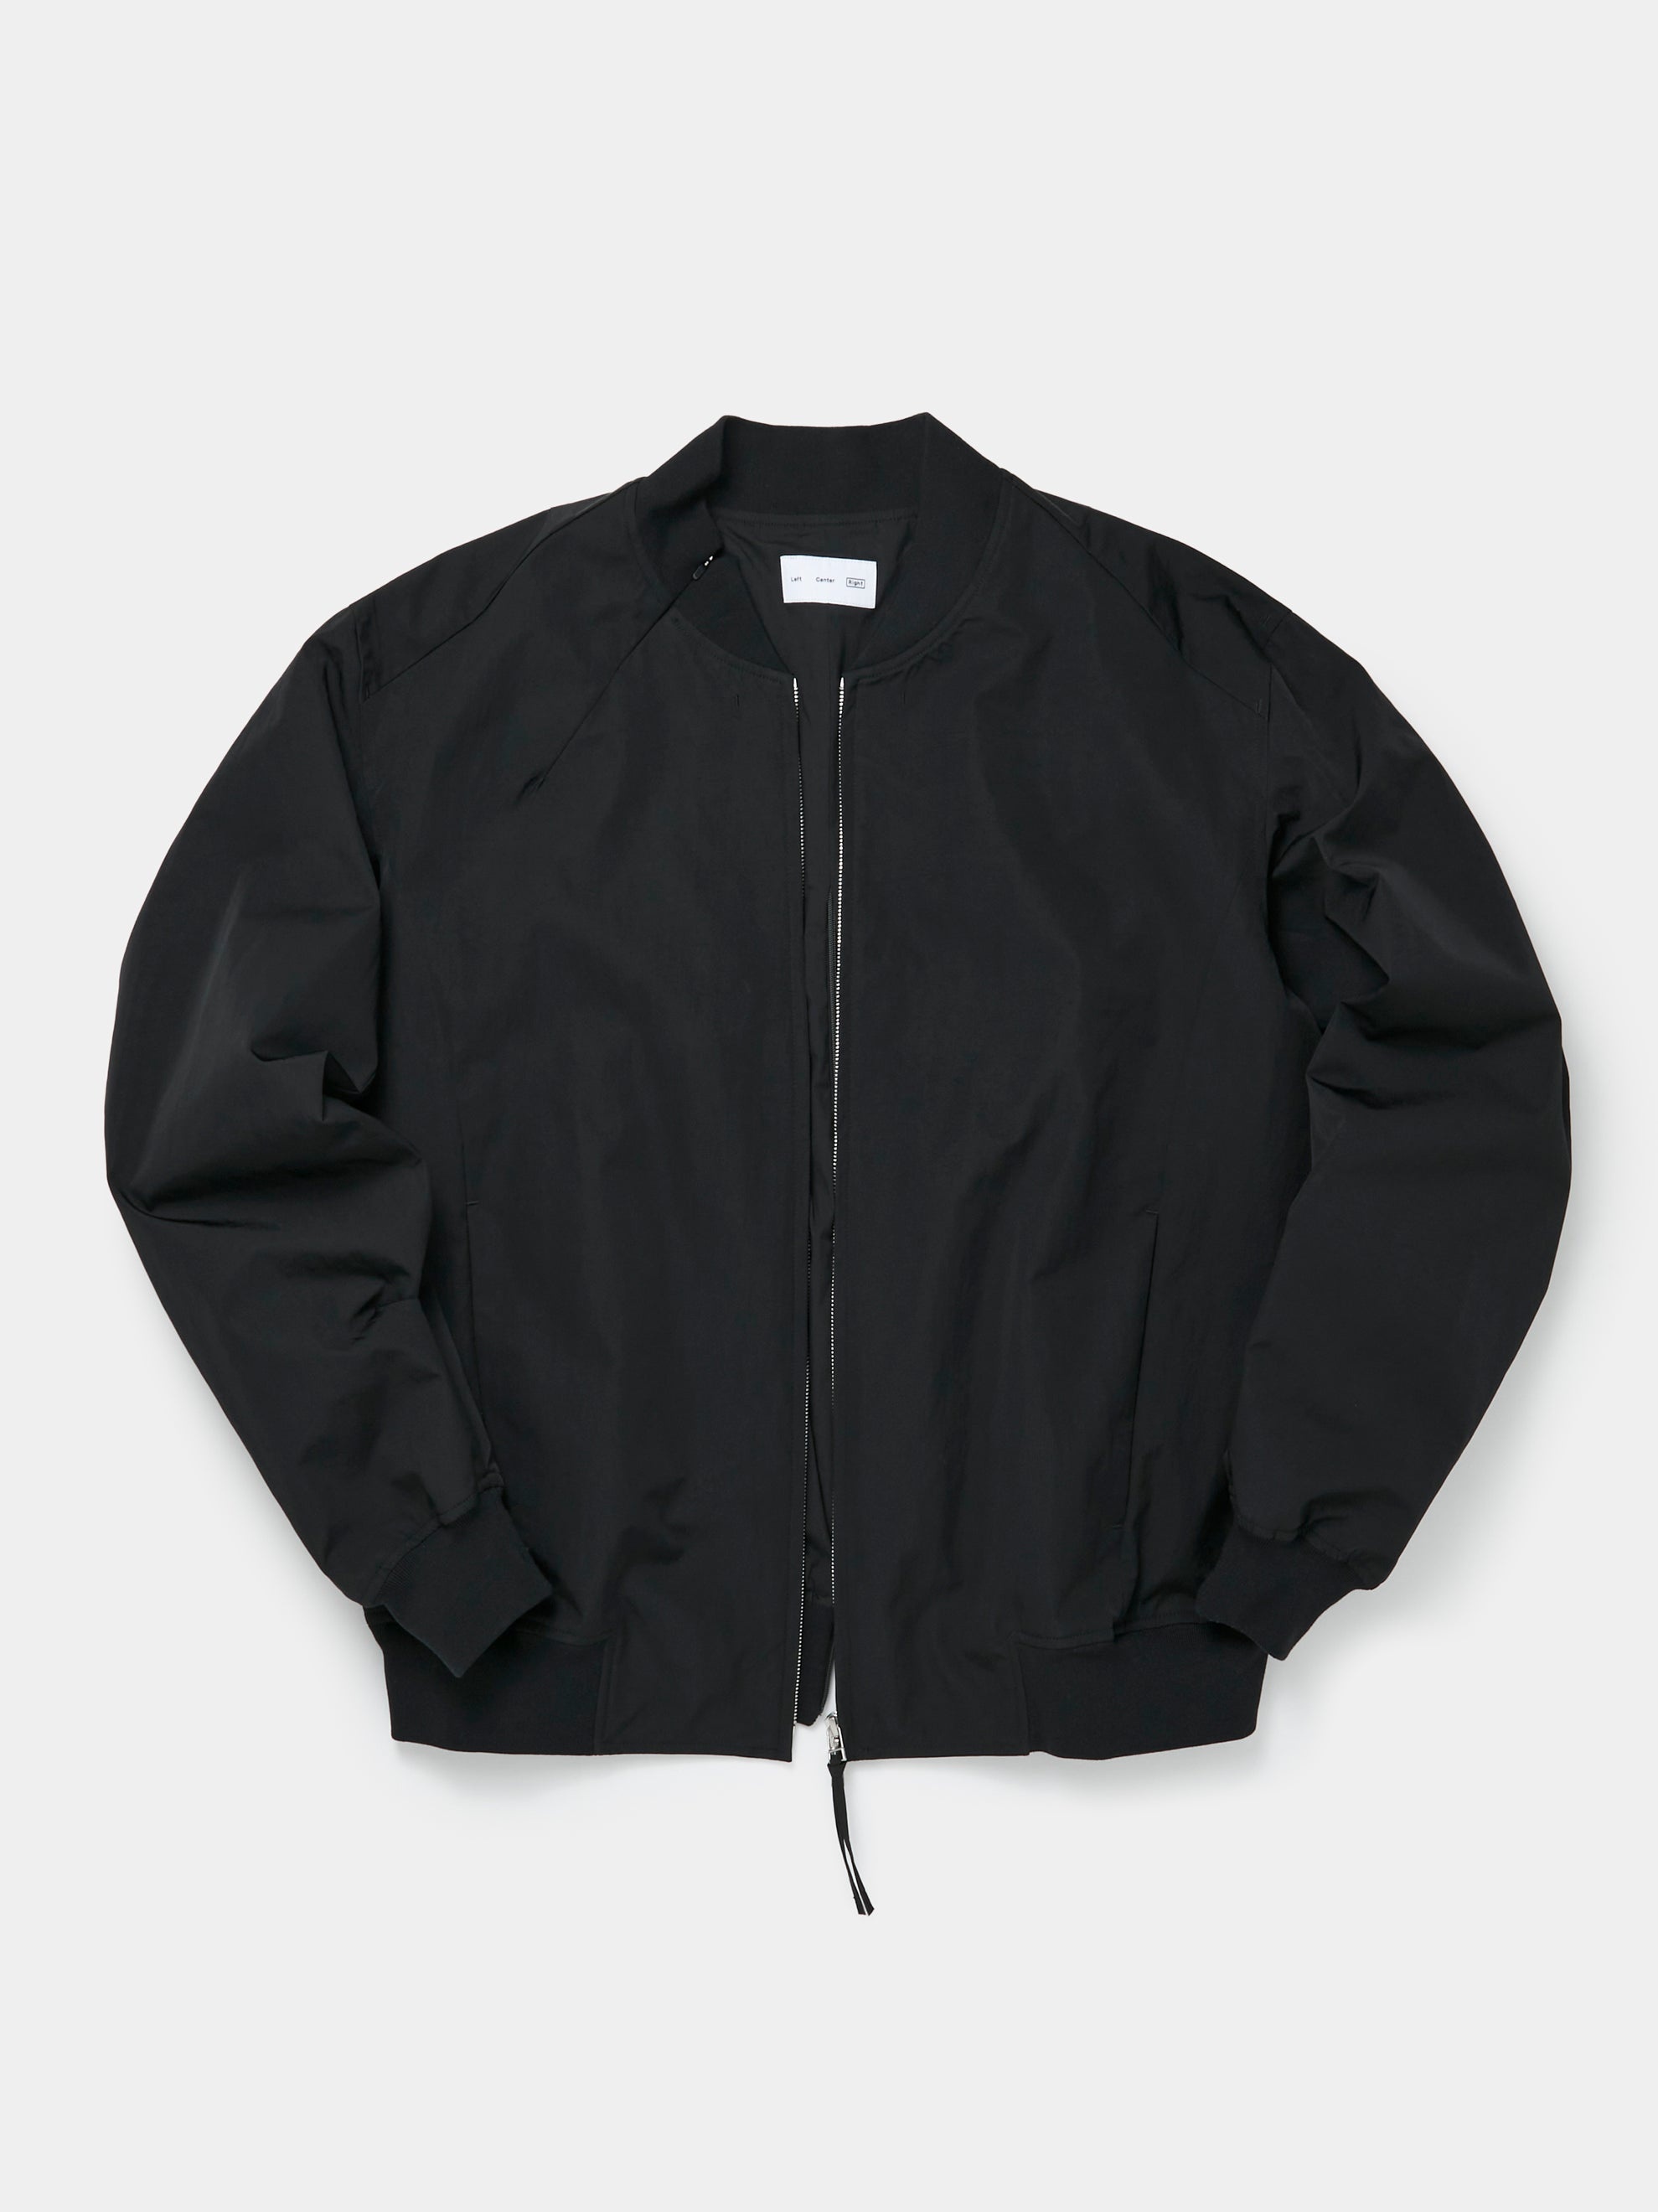 POST ARCHIVE FACTION (PAF) 6.0 BOMBER RIGHT (BLACK) | REVERSIBLE